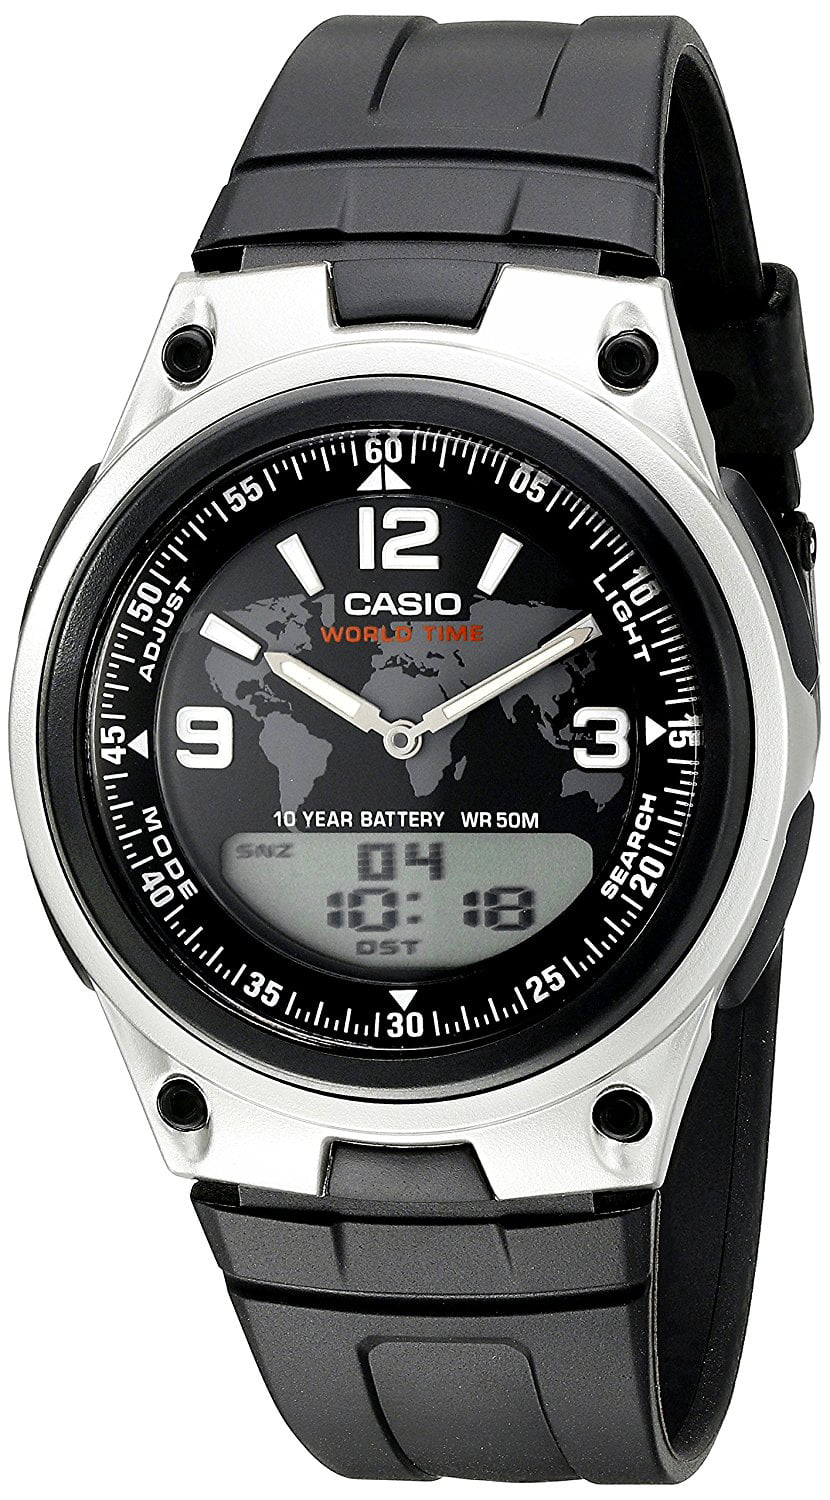 casio watch used by taliban as timer